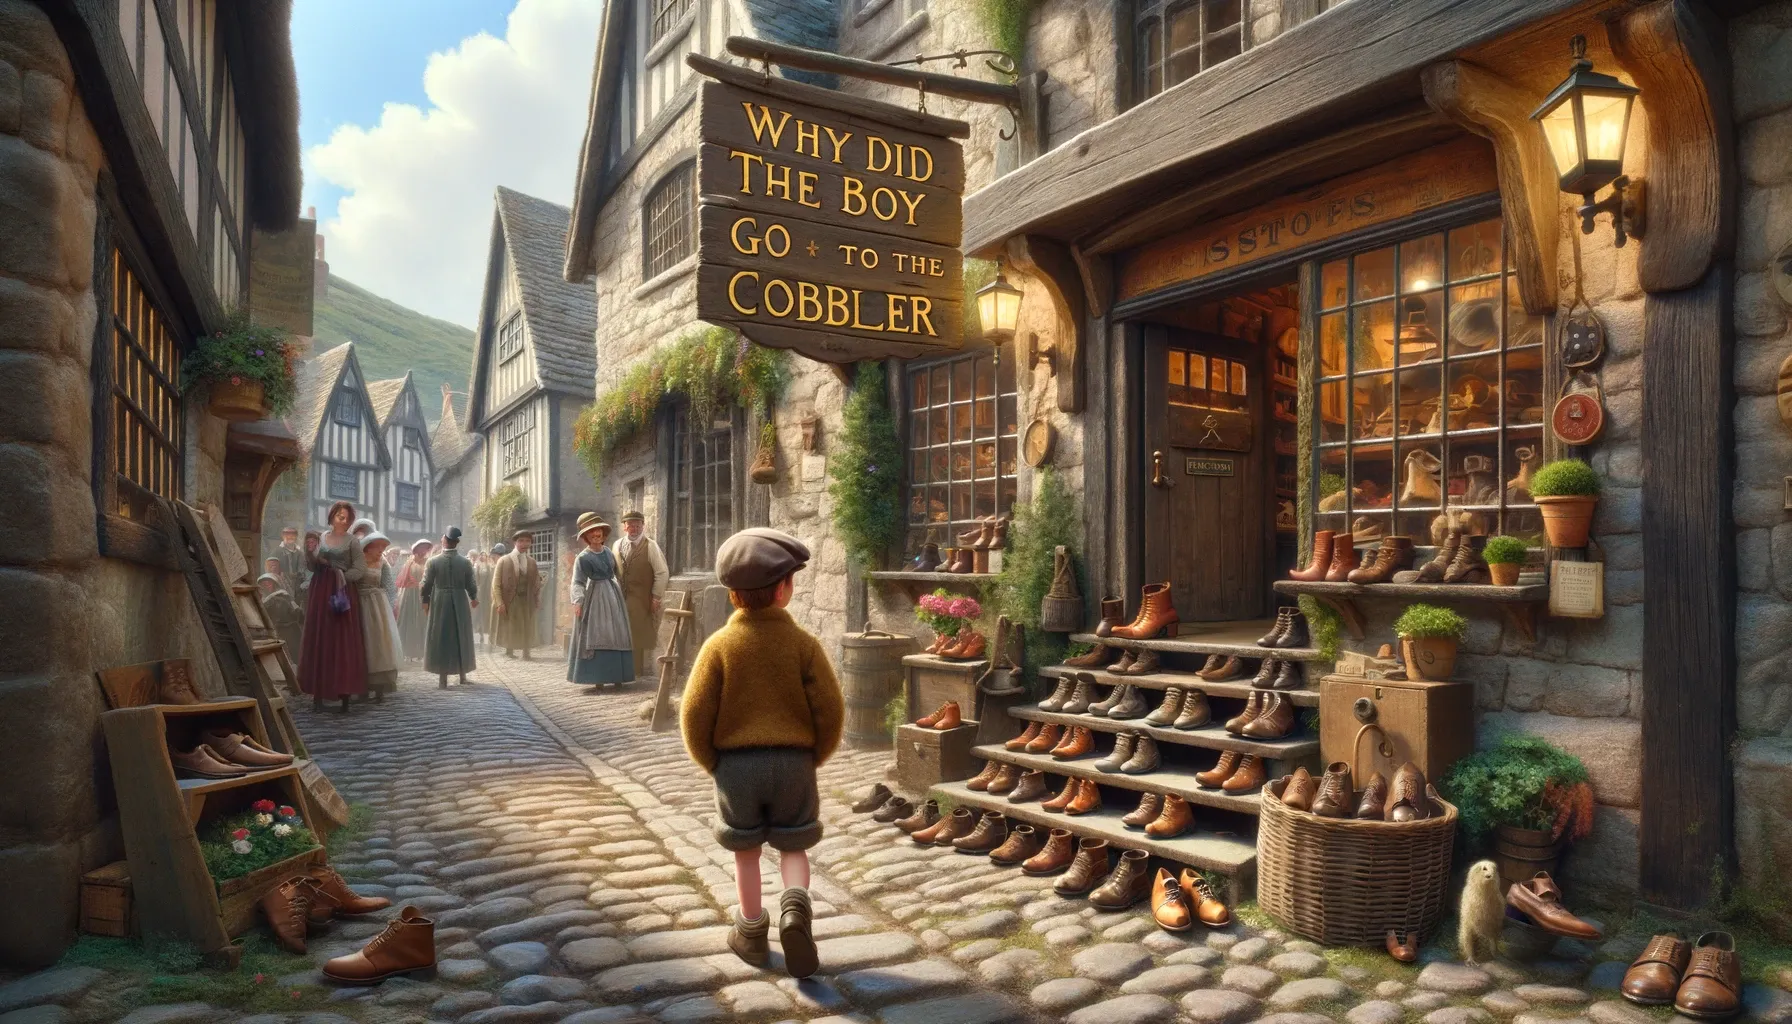 Why Did the Boy Go to the Cobbler? Answer